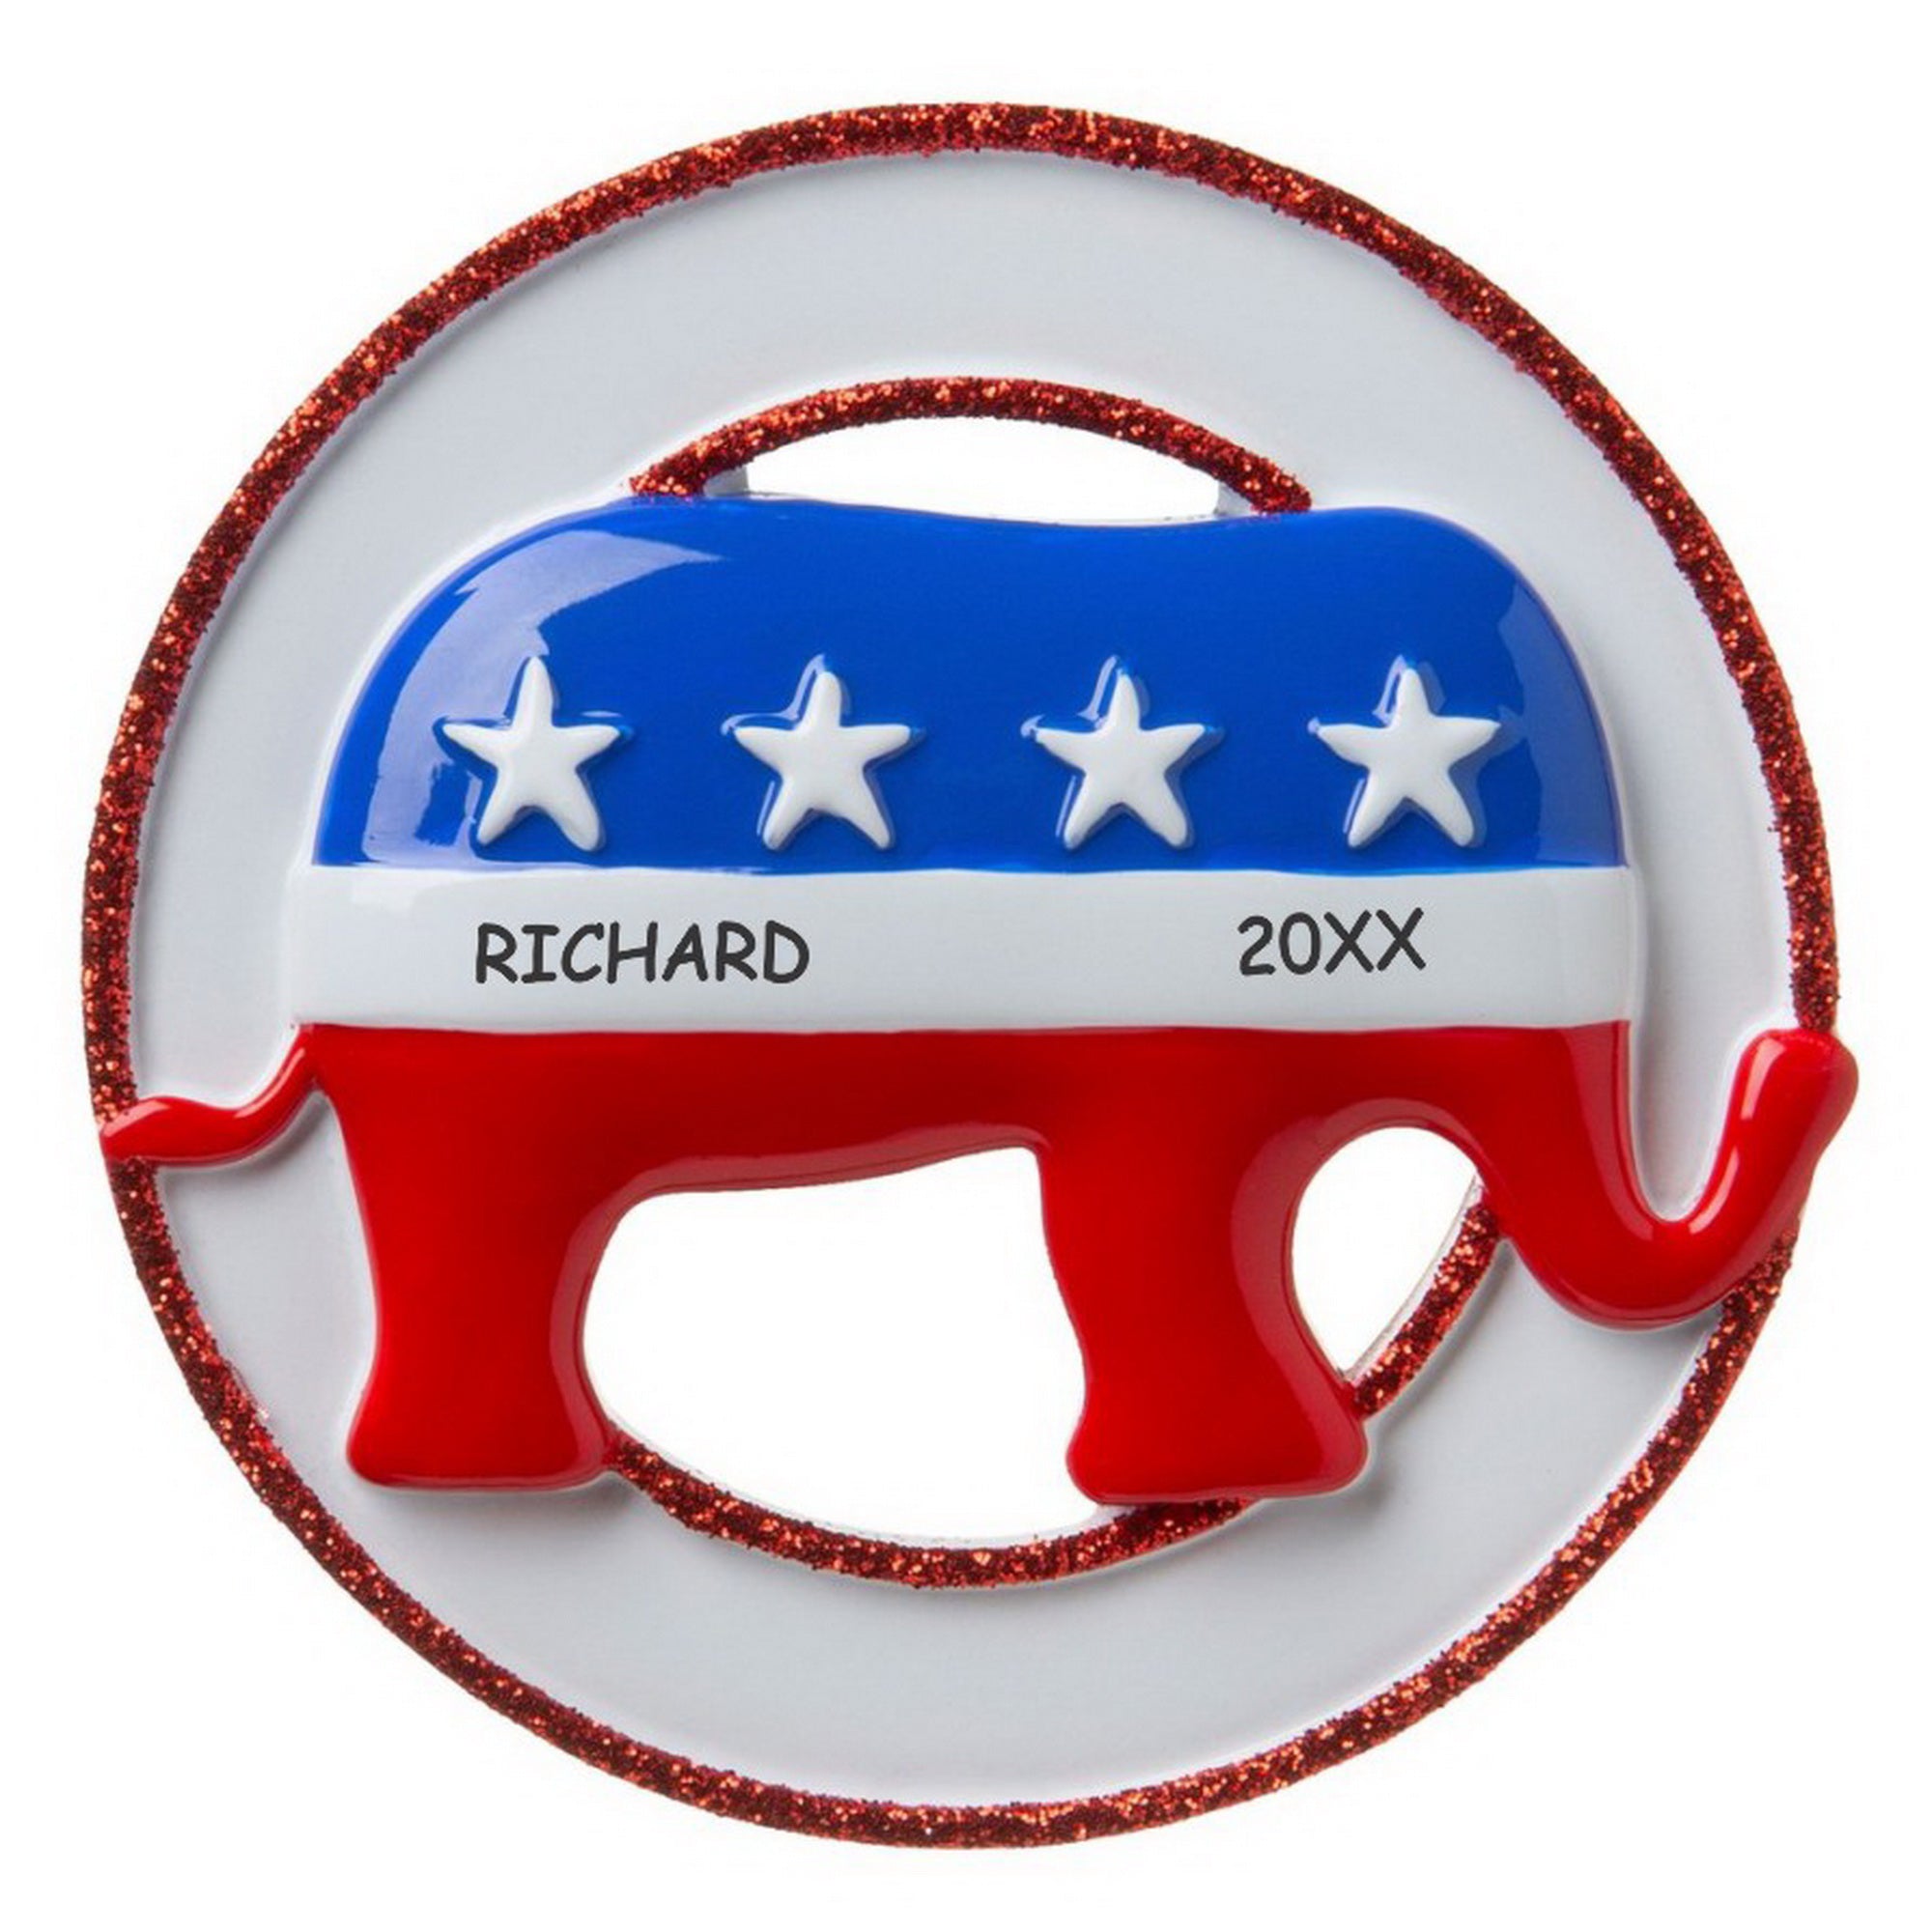 Personalized Political Christmas Ornament - Republican